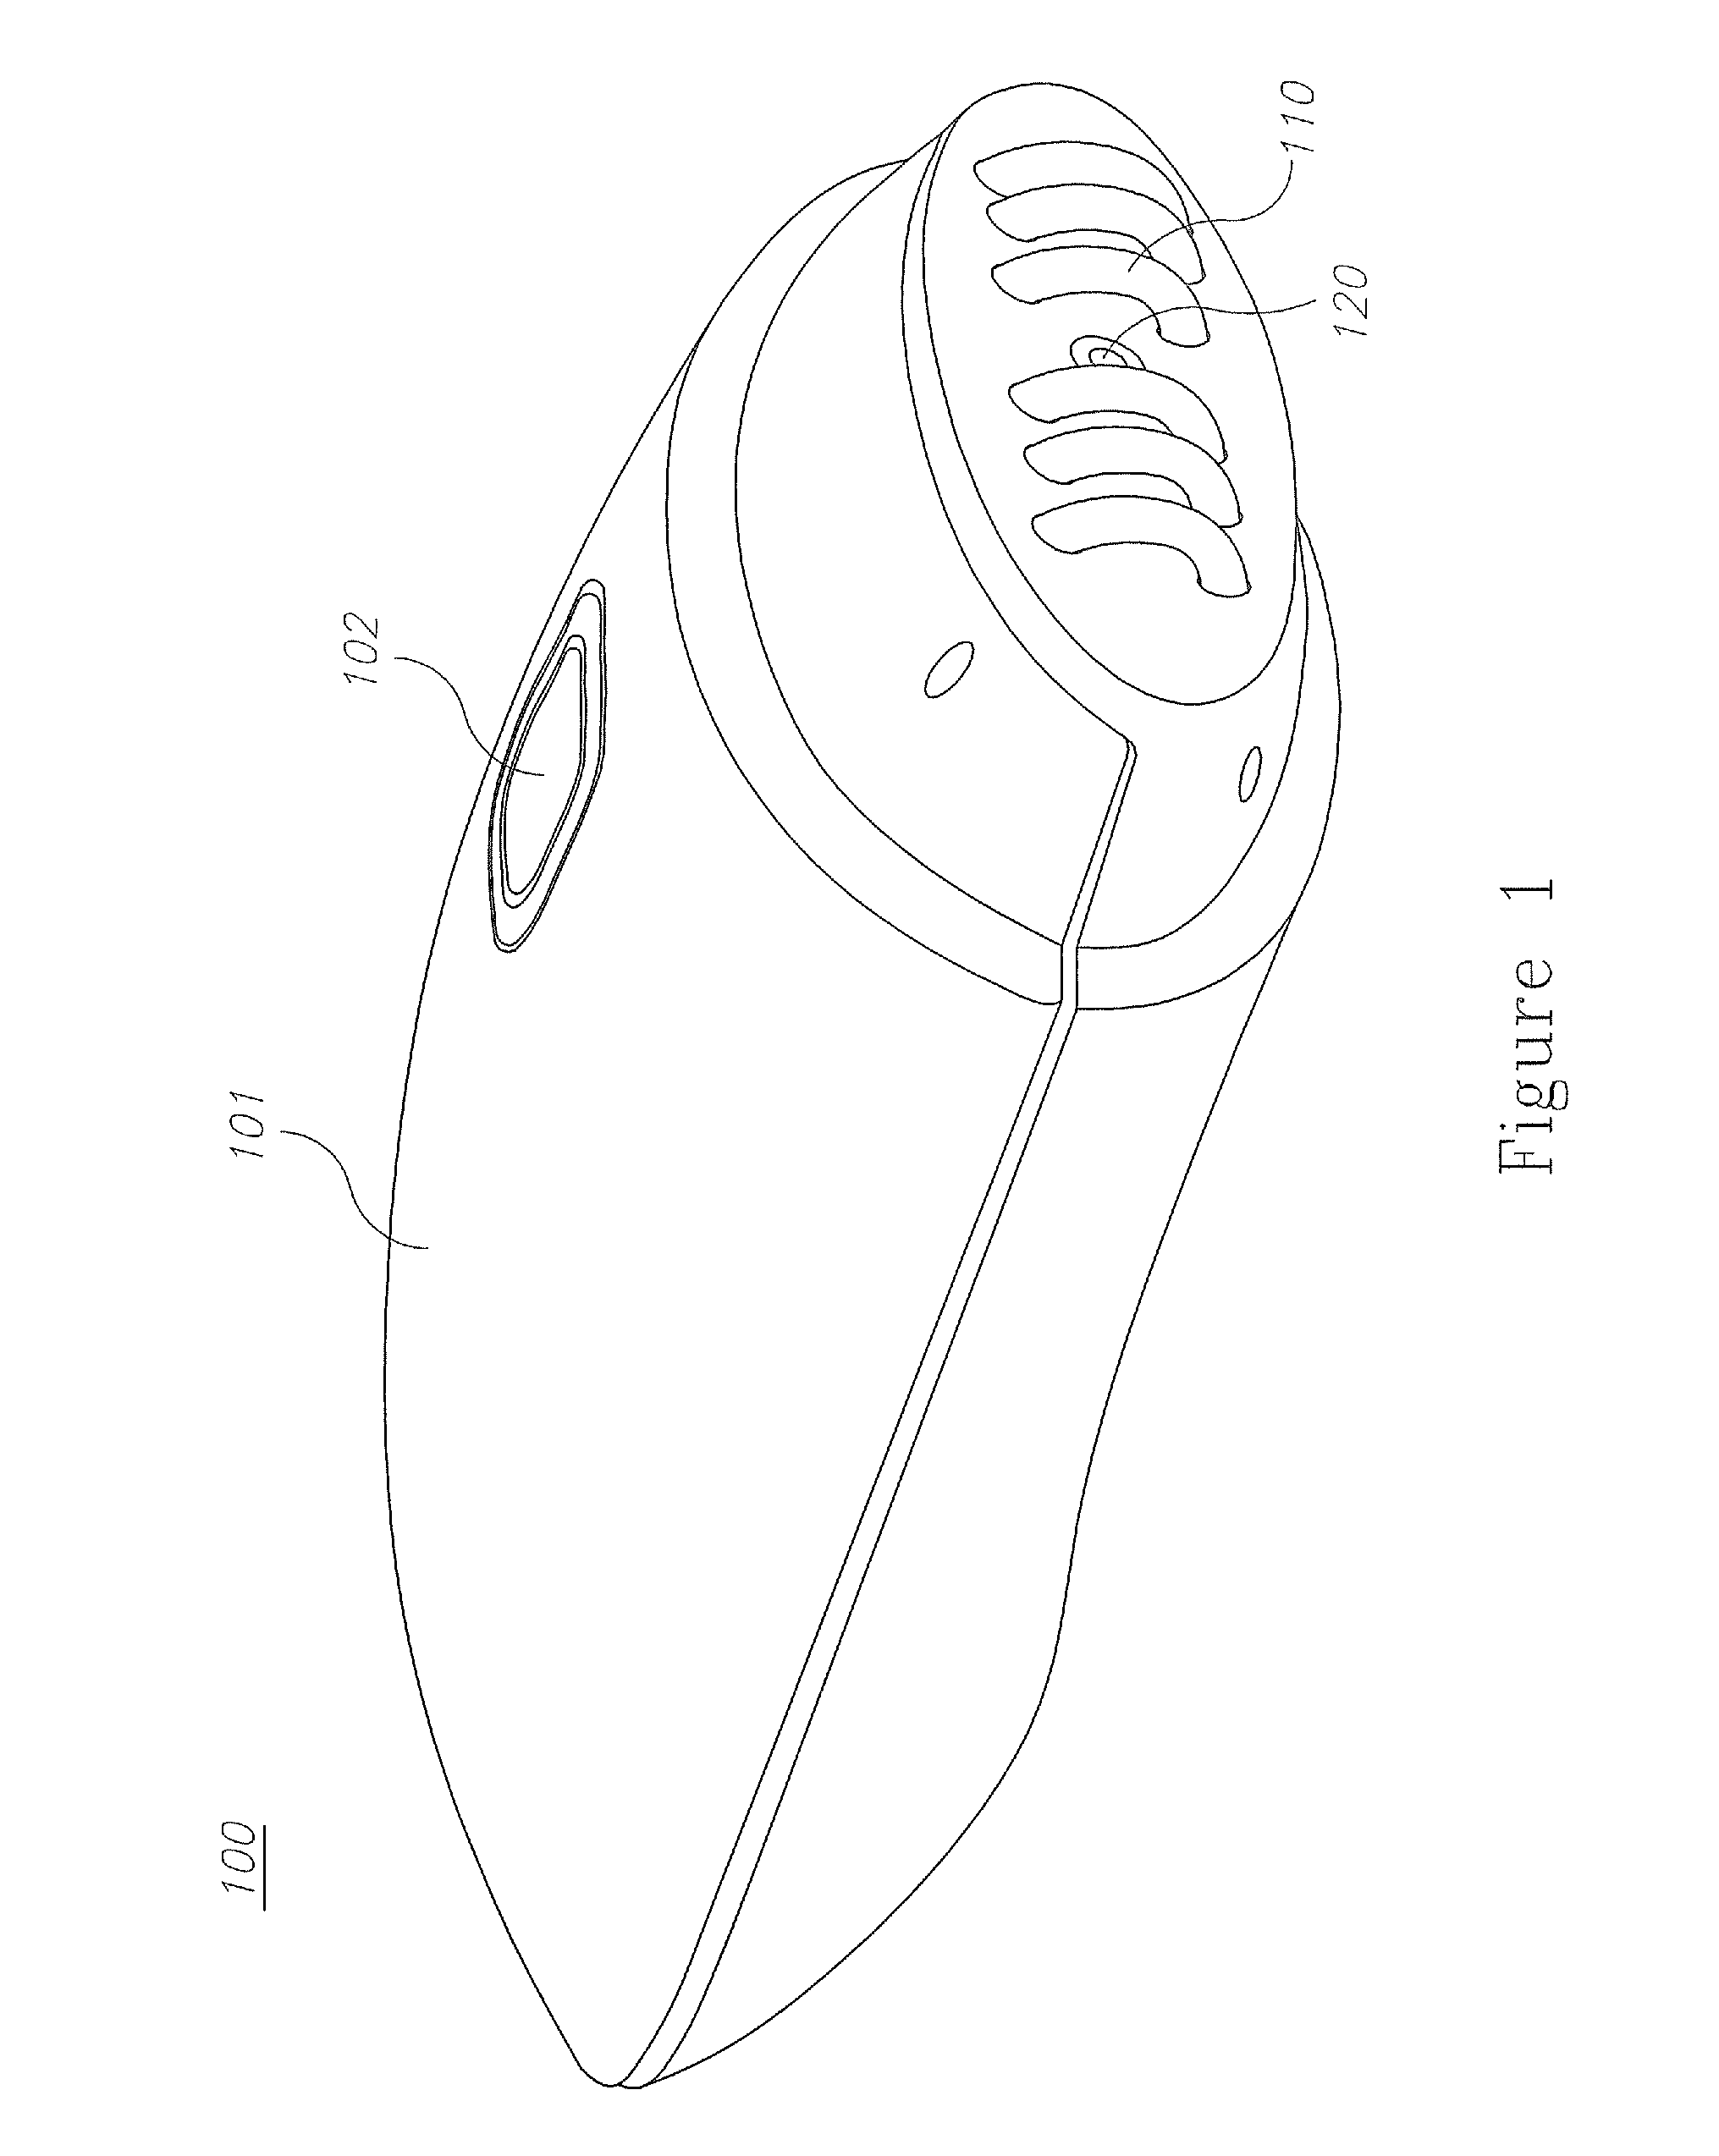 Skin treatment devices and methods